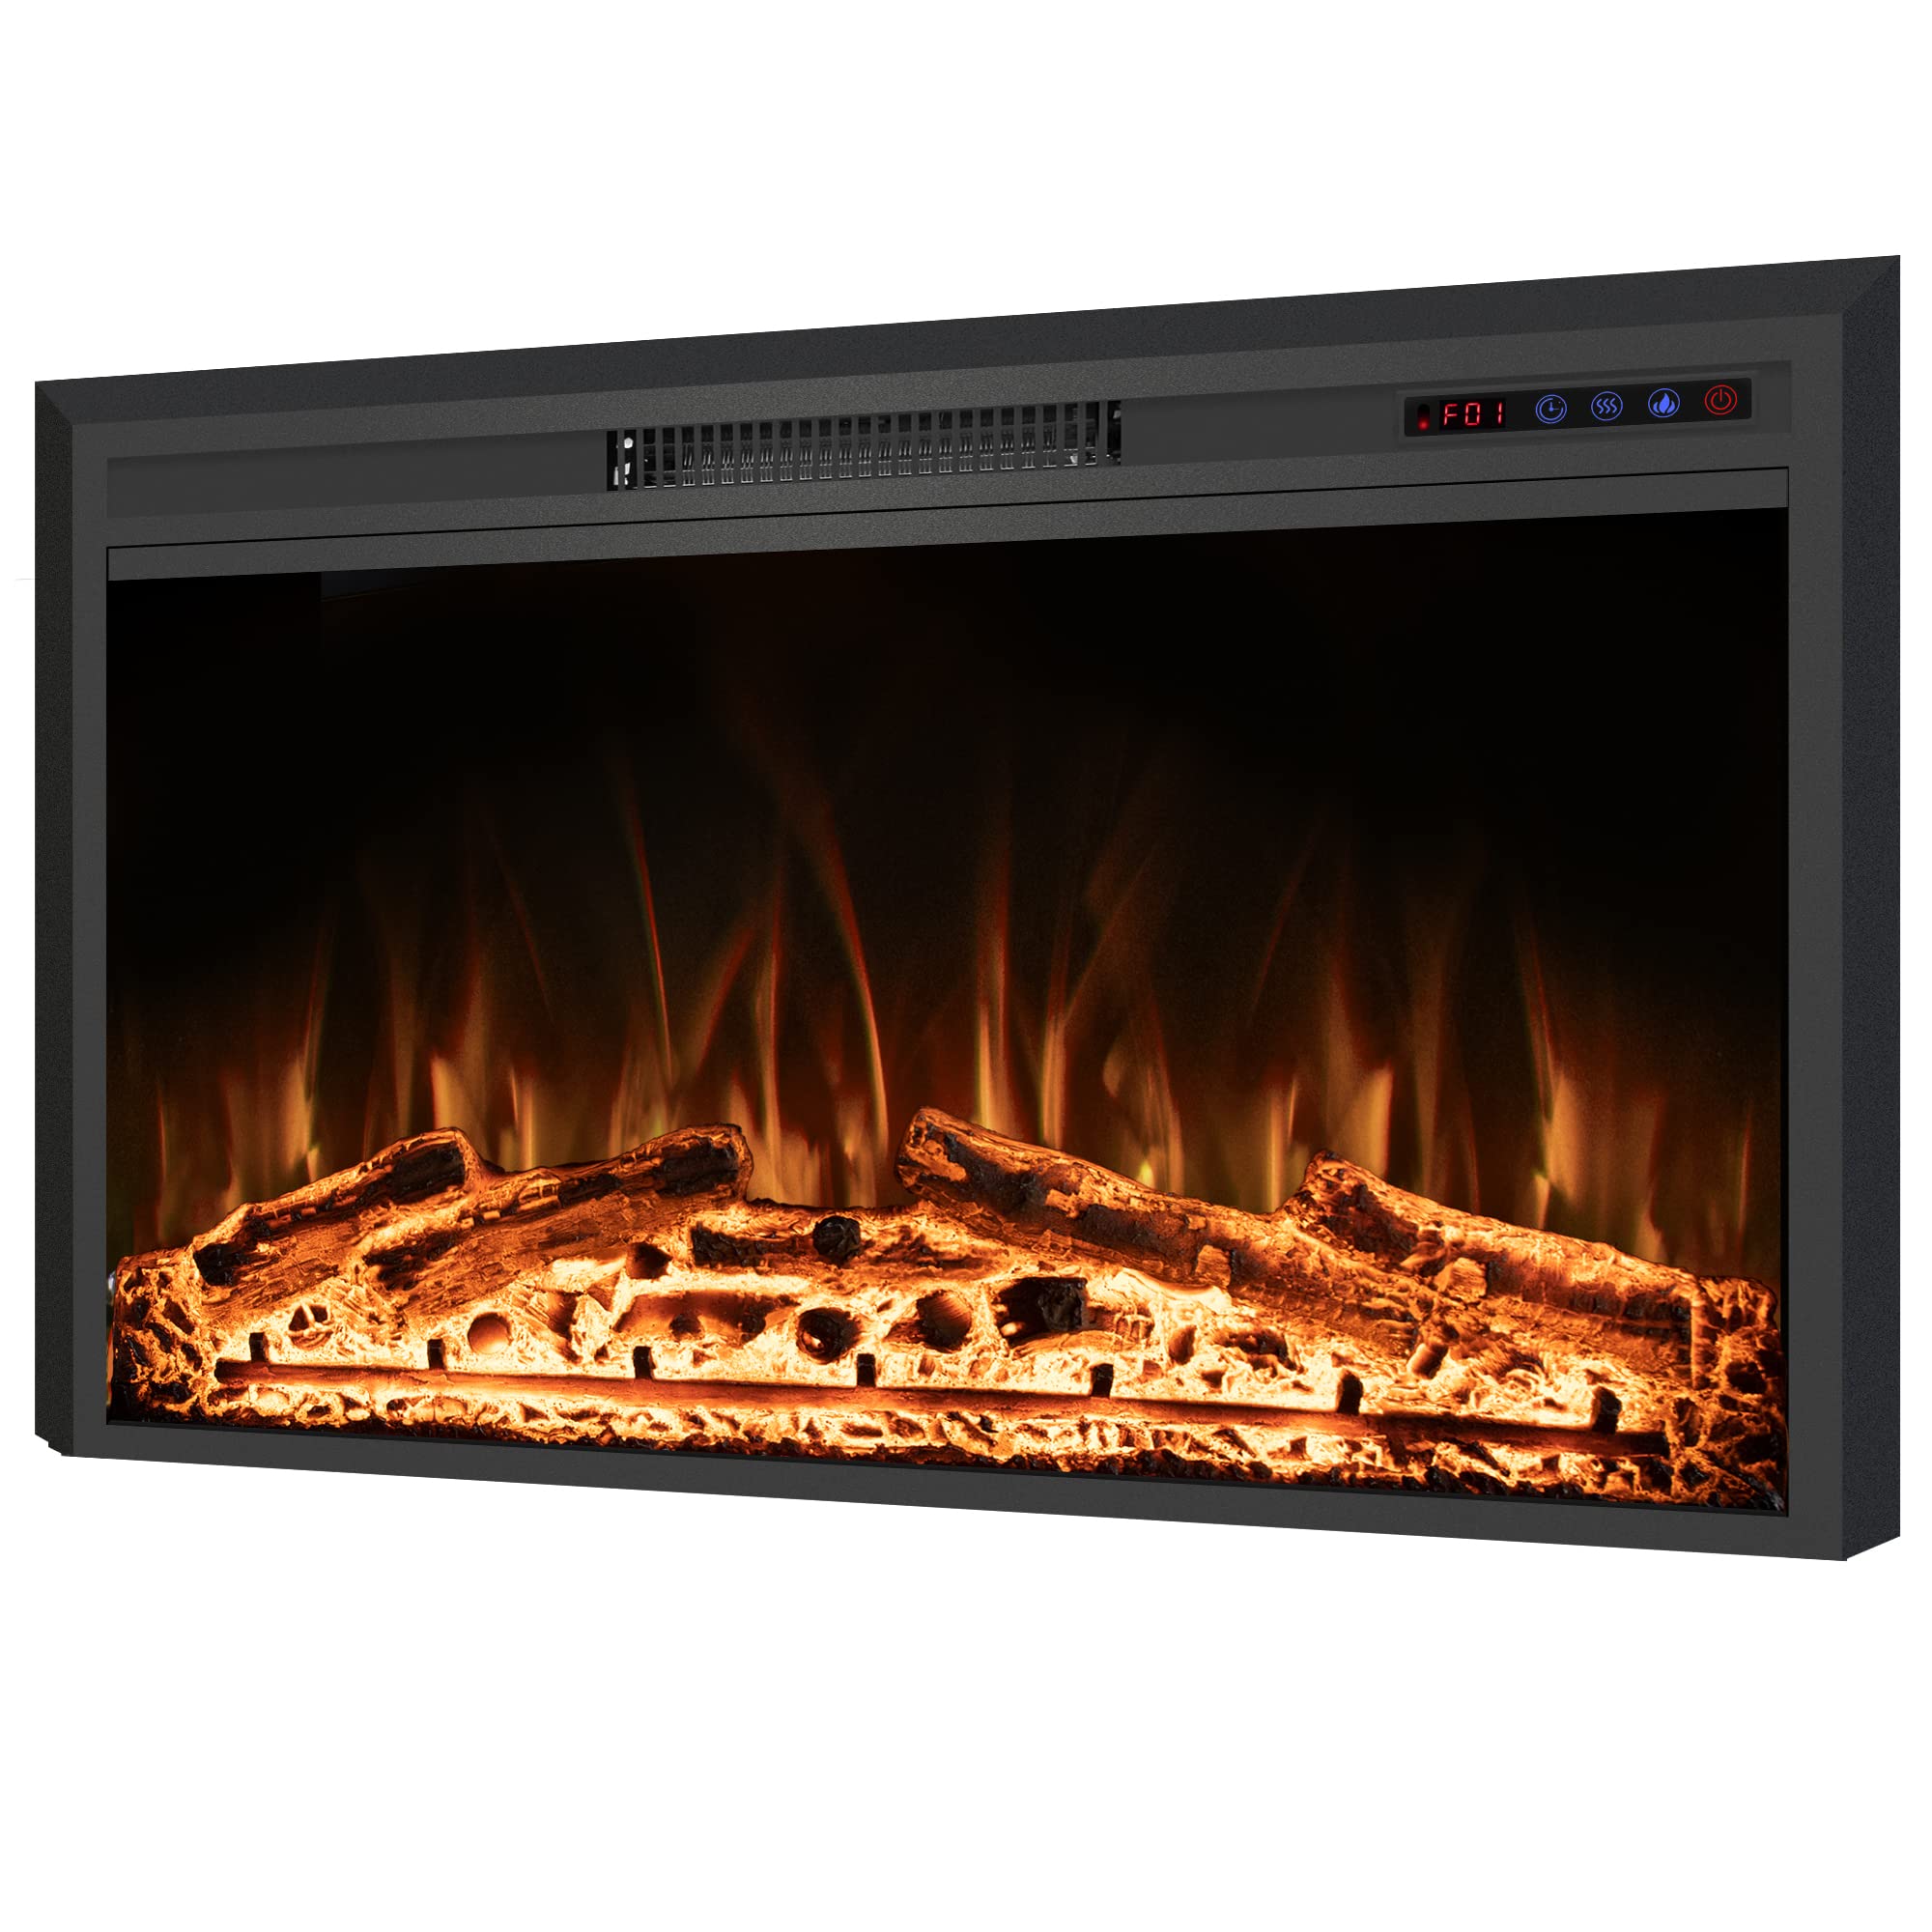 Rodalflame 50" Wide Electric Fireplace Inserts with Adjustable Flame Colors, Fireplace Heater with Touch Screen & Remote Control, Recessed in Wall, 750/1500W, Timer